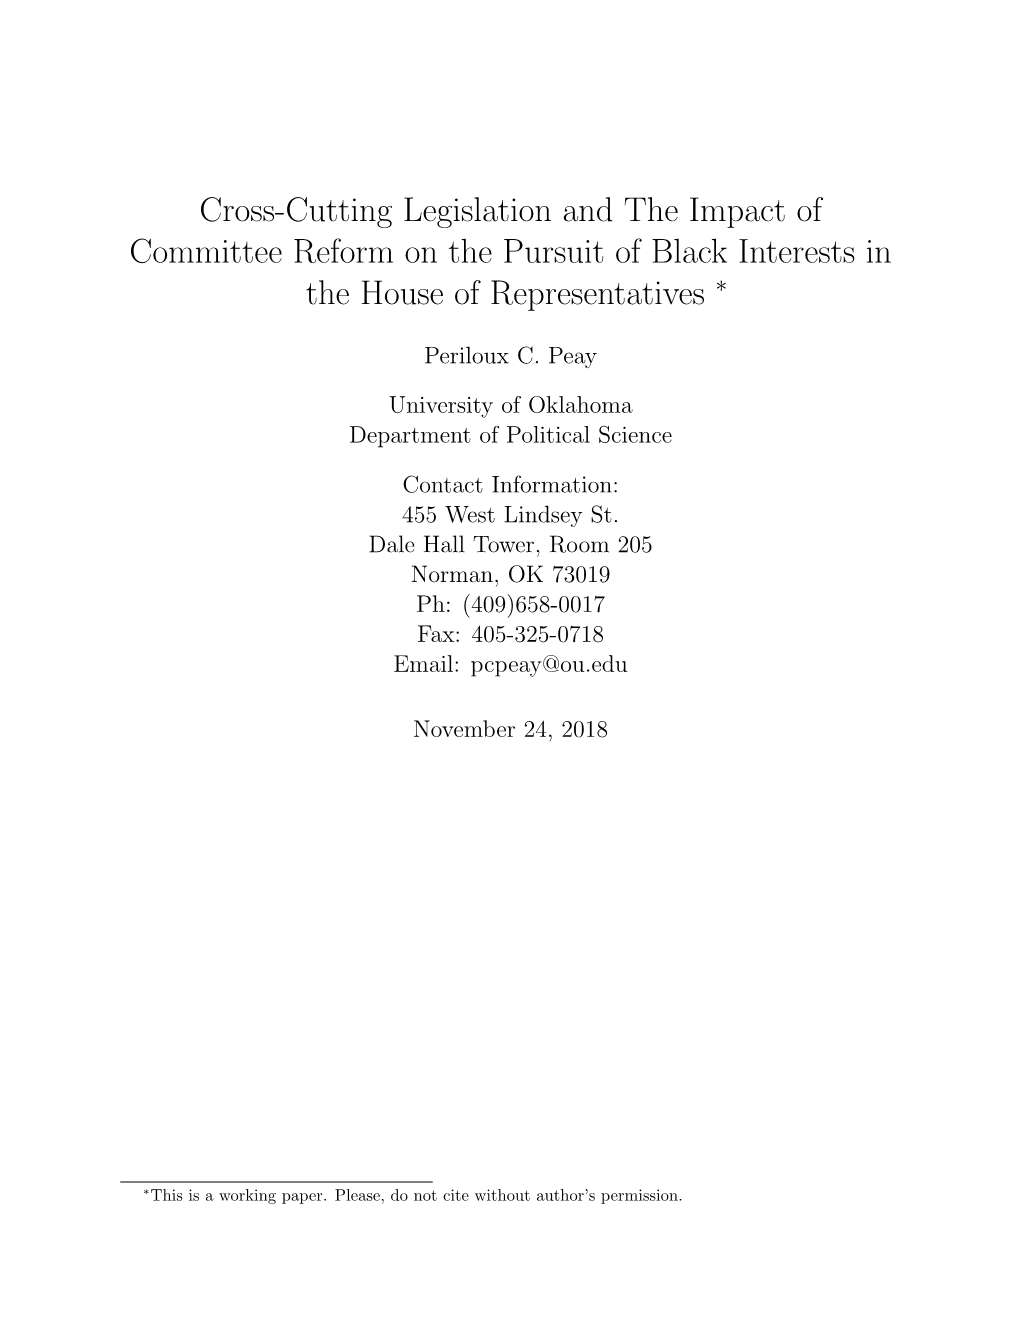 Cross-Cutting Legislation and the Impact of Committee Reform on the Pursuit of Black Interests in the House of Representatives ∗